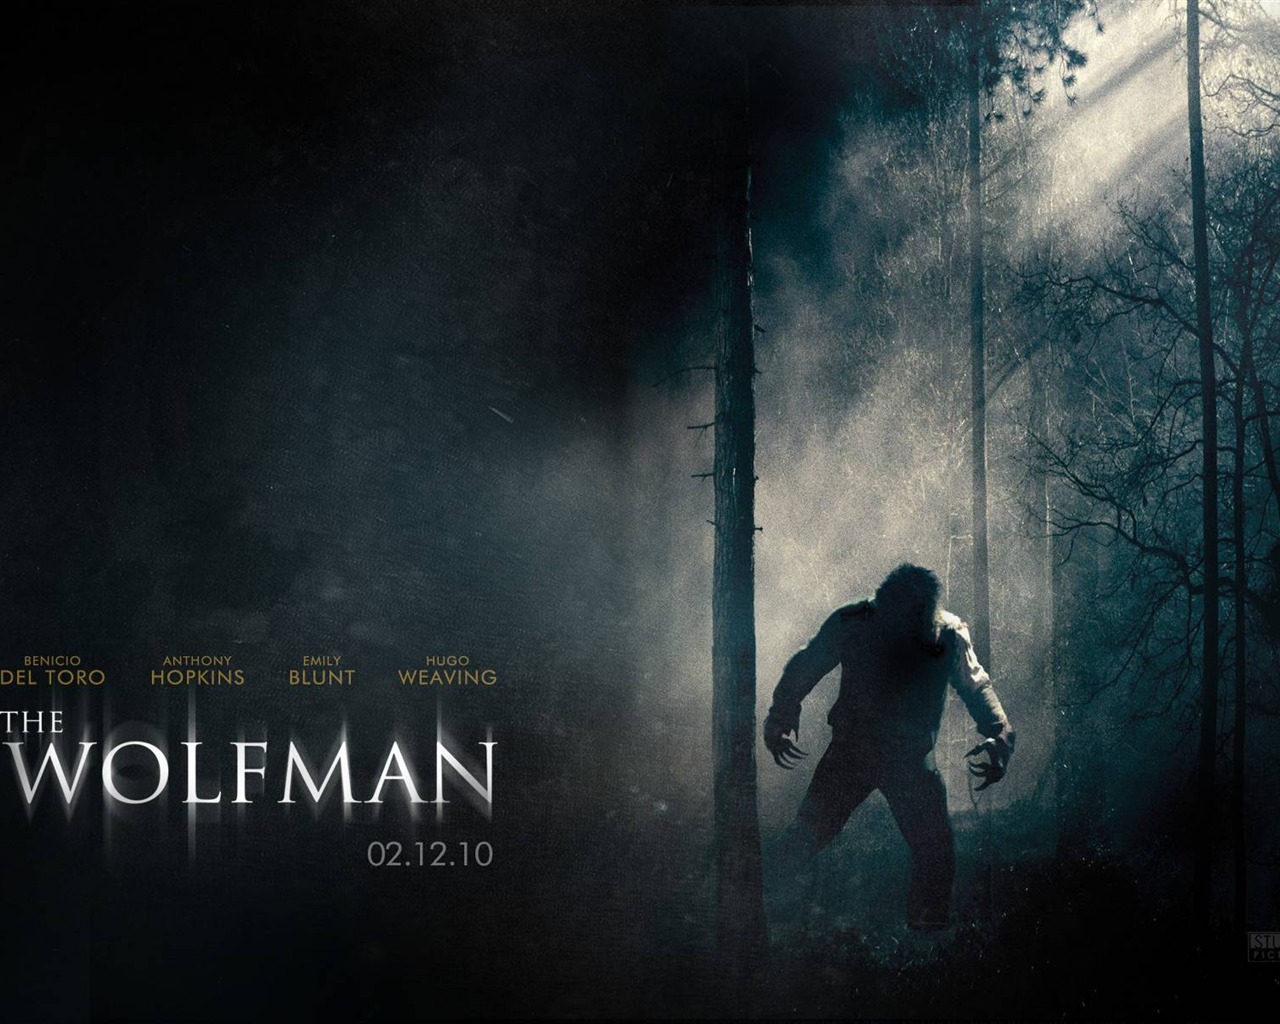 The Wolfman Movie Wallpapers #2 - 1280x1024